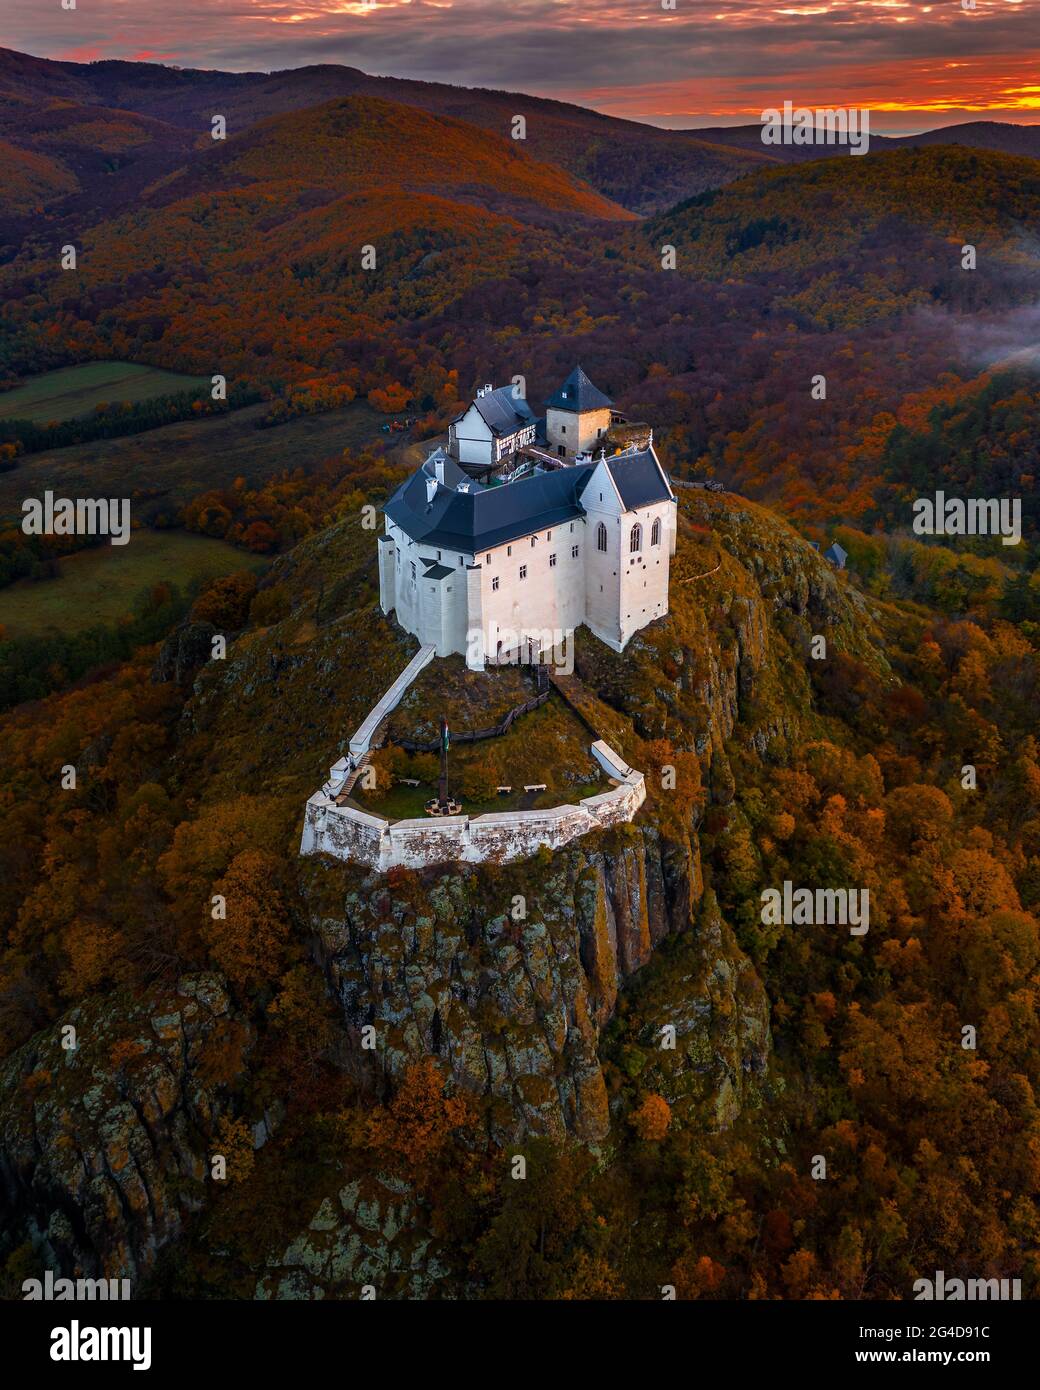 Fuzer, Hungary - Aerial view of the beautiful Castle of Fuzer with amazing colorful sunrise sky and clouds on an autumn morning. The castle has been l Stock Photo